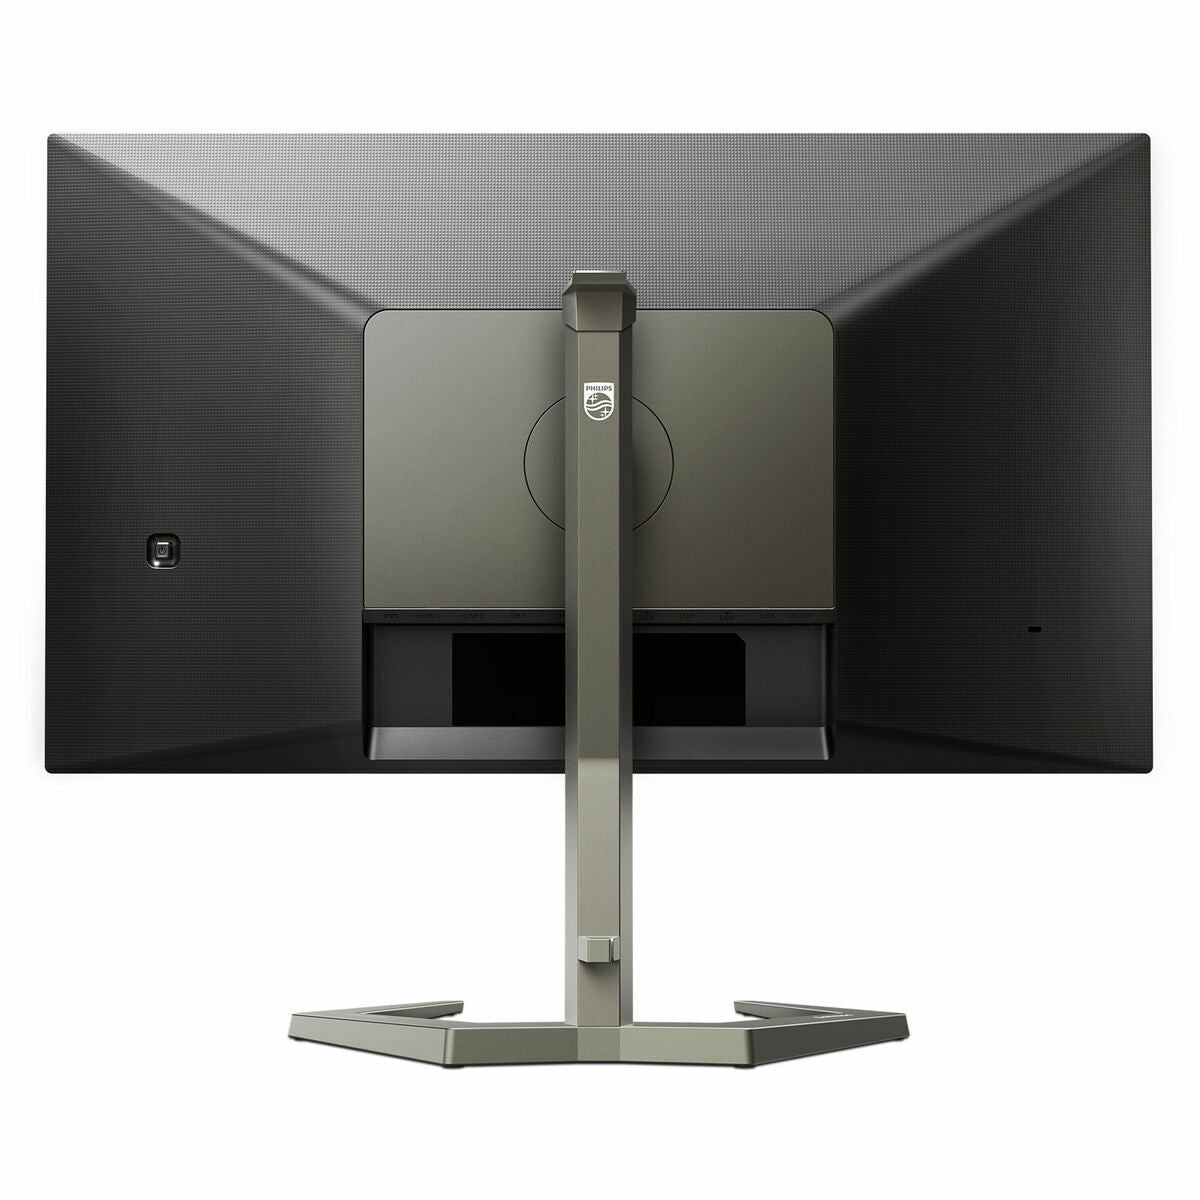 Monitor Philips 27M1F5500P/00 LED 27" Flicker free, Philips, Computing, monitor-philips-27m1f5500p-00-led-27-flicker-free, Brand_Philips, category-reference-2609, category-reference-2642, category-reference-2644, category-reference-t-19685, computers / peripherals, Condition_NEW, office, Price_600 - 700, Teleworking, RiotNook